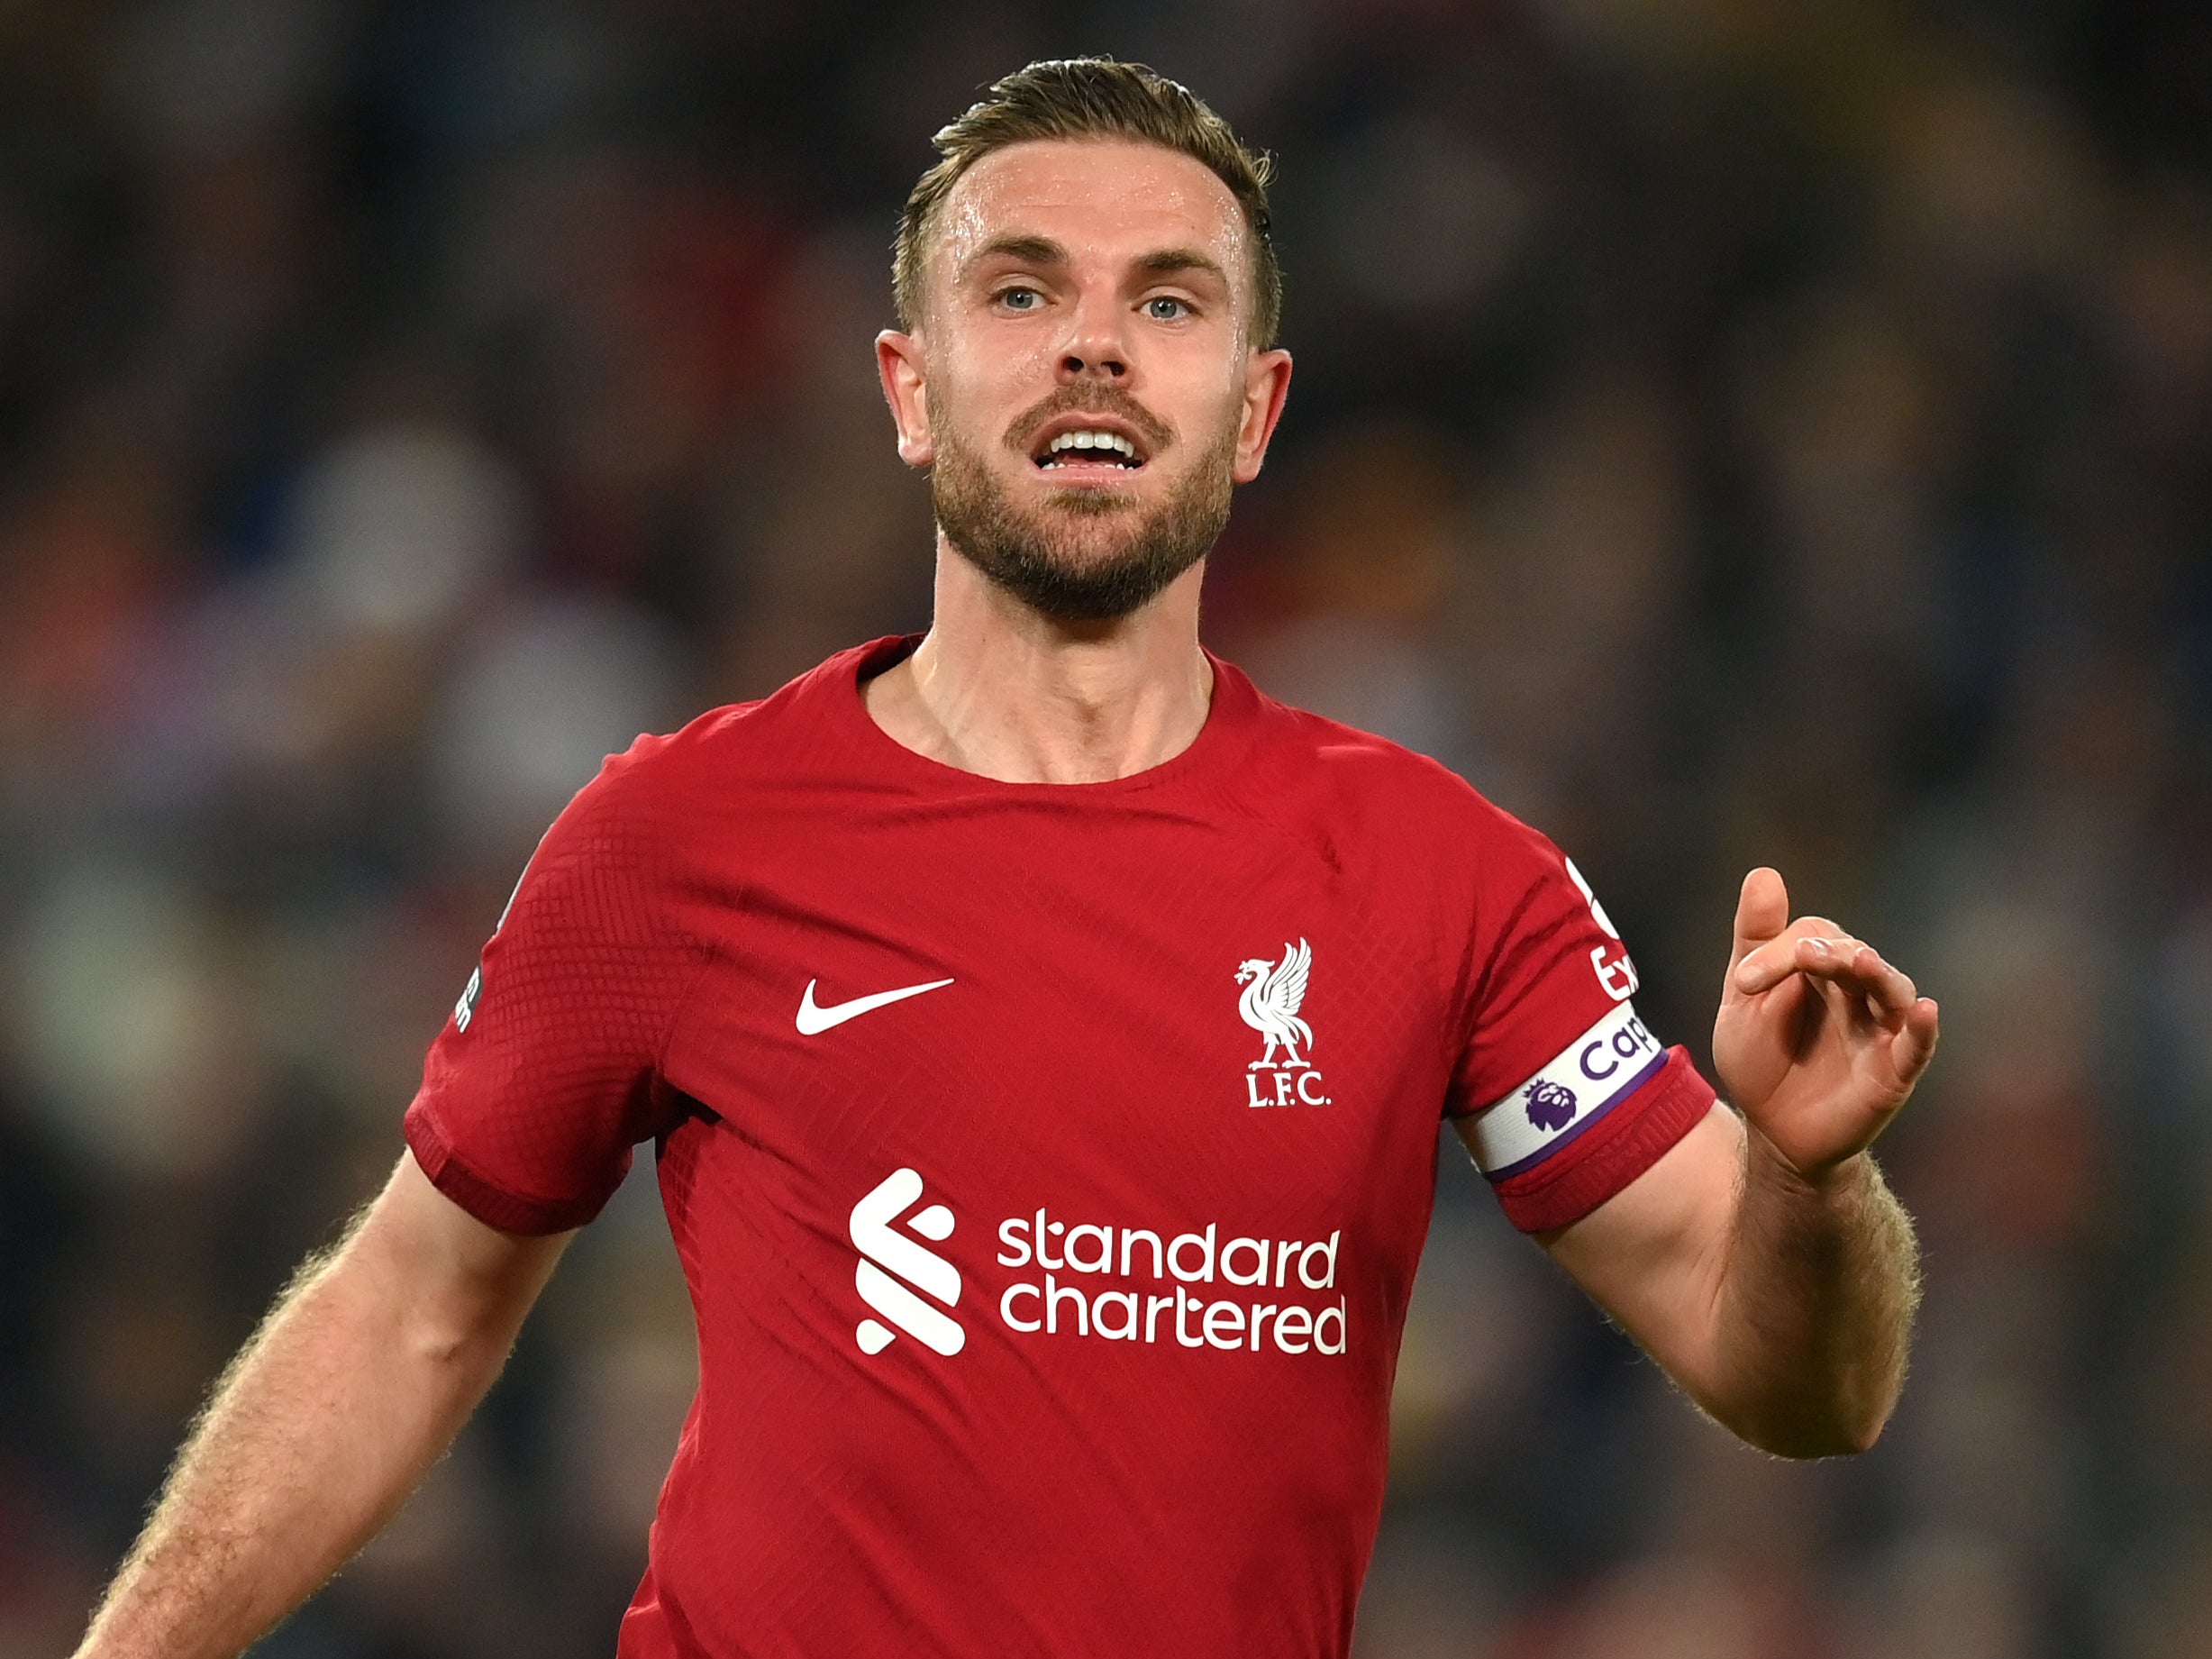 Jordan Henderson faces Liverpool transfer decision with Saudi offer looming | The Independent